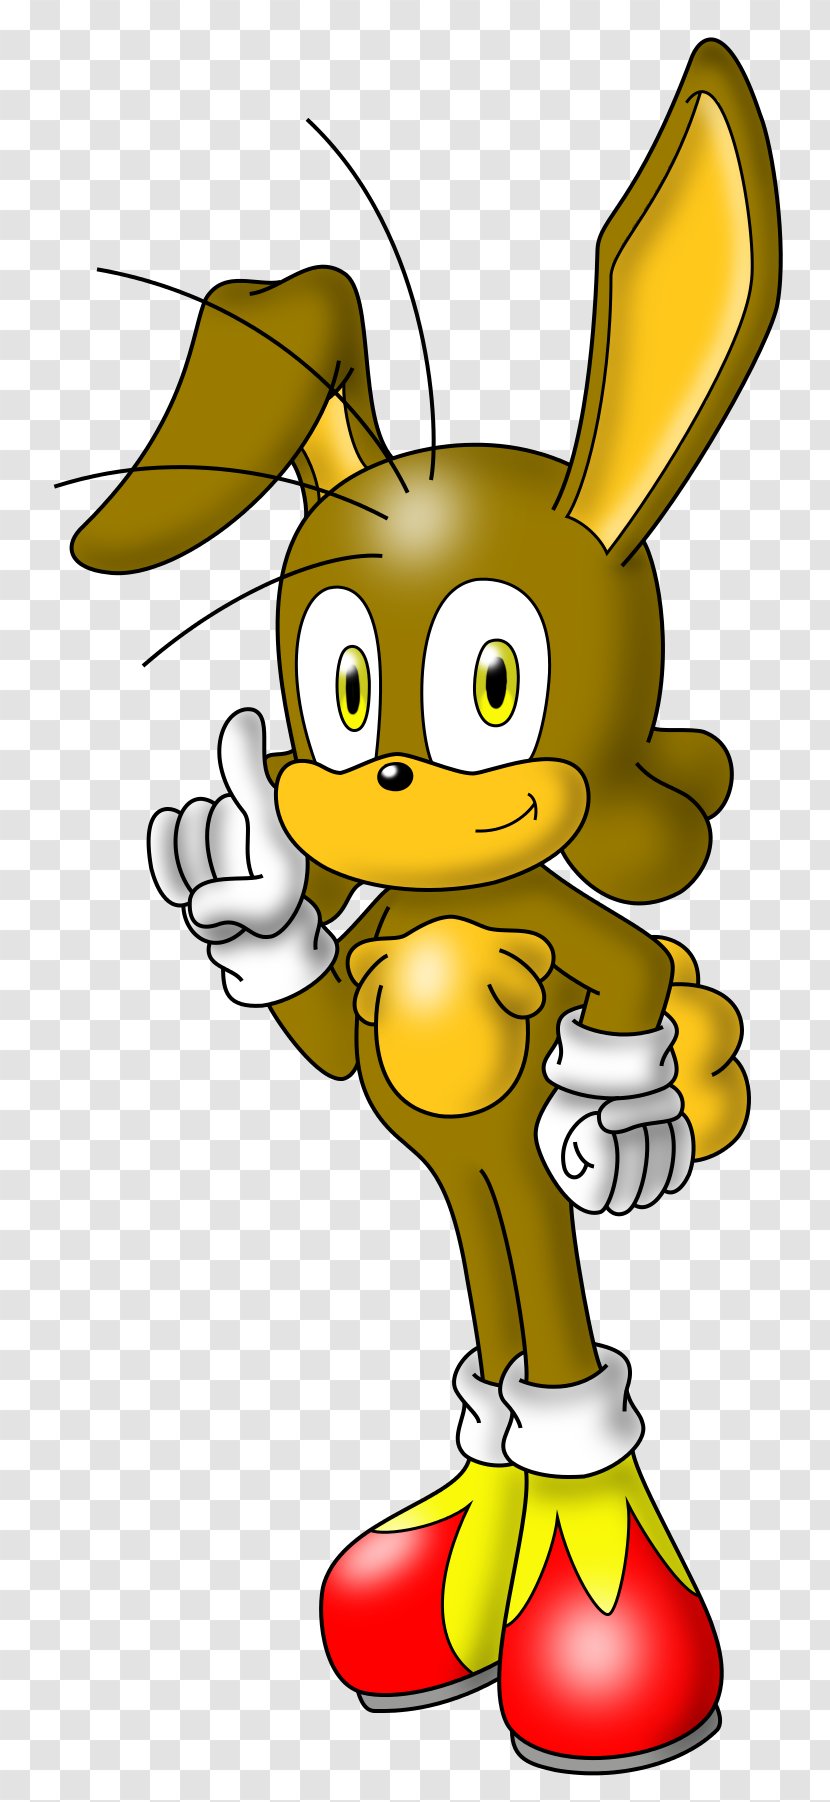 Rabbit Big The Cat Chocolate Bunny Sonic Hedgehog Squirrel - Black And White - Pepper In Kind Transparent PNG